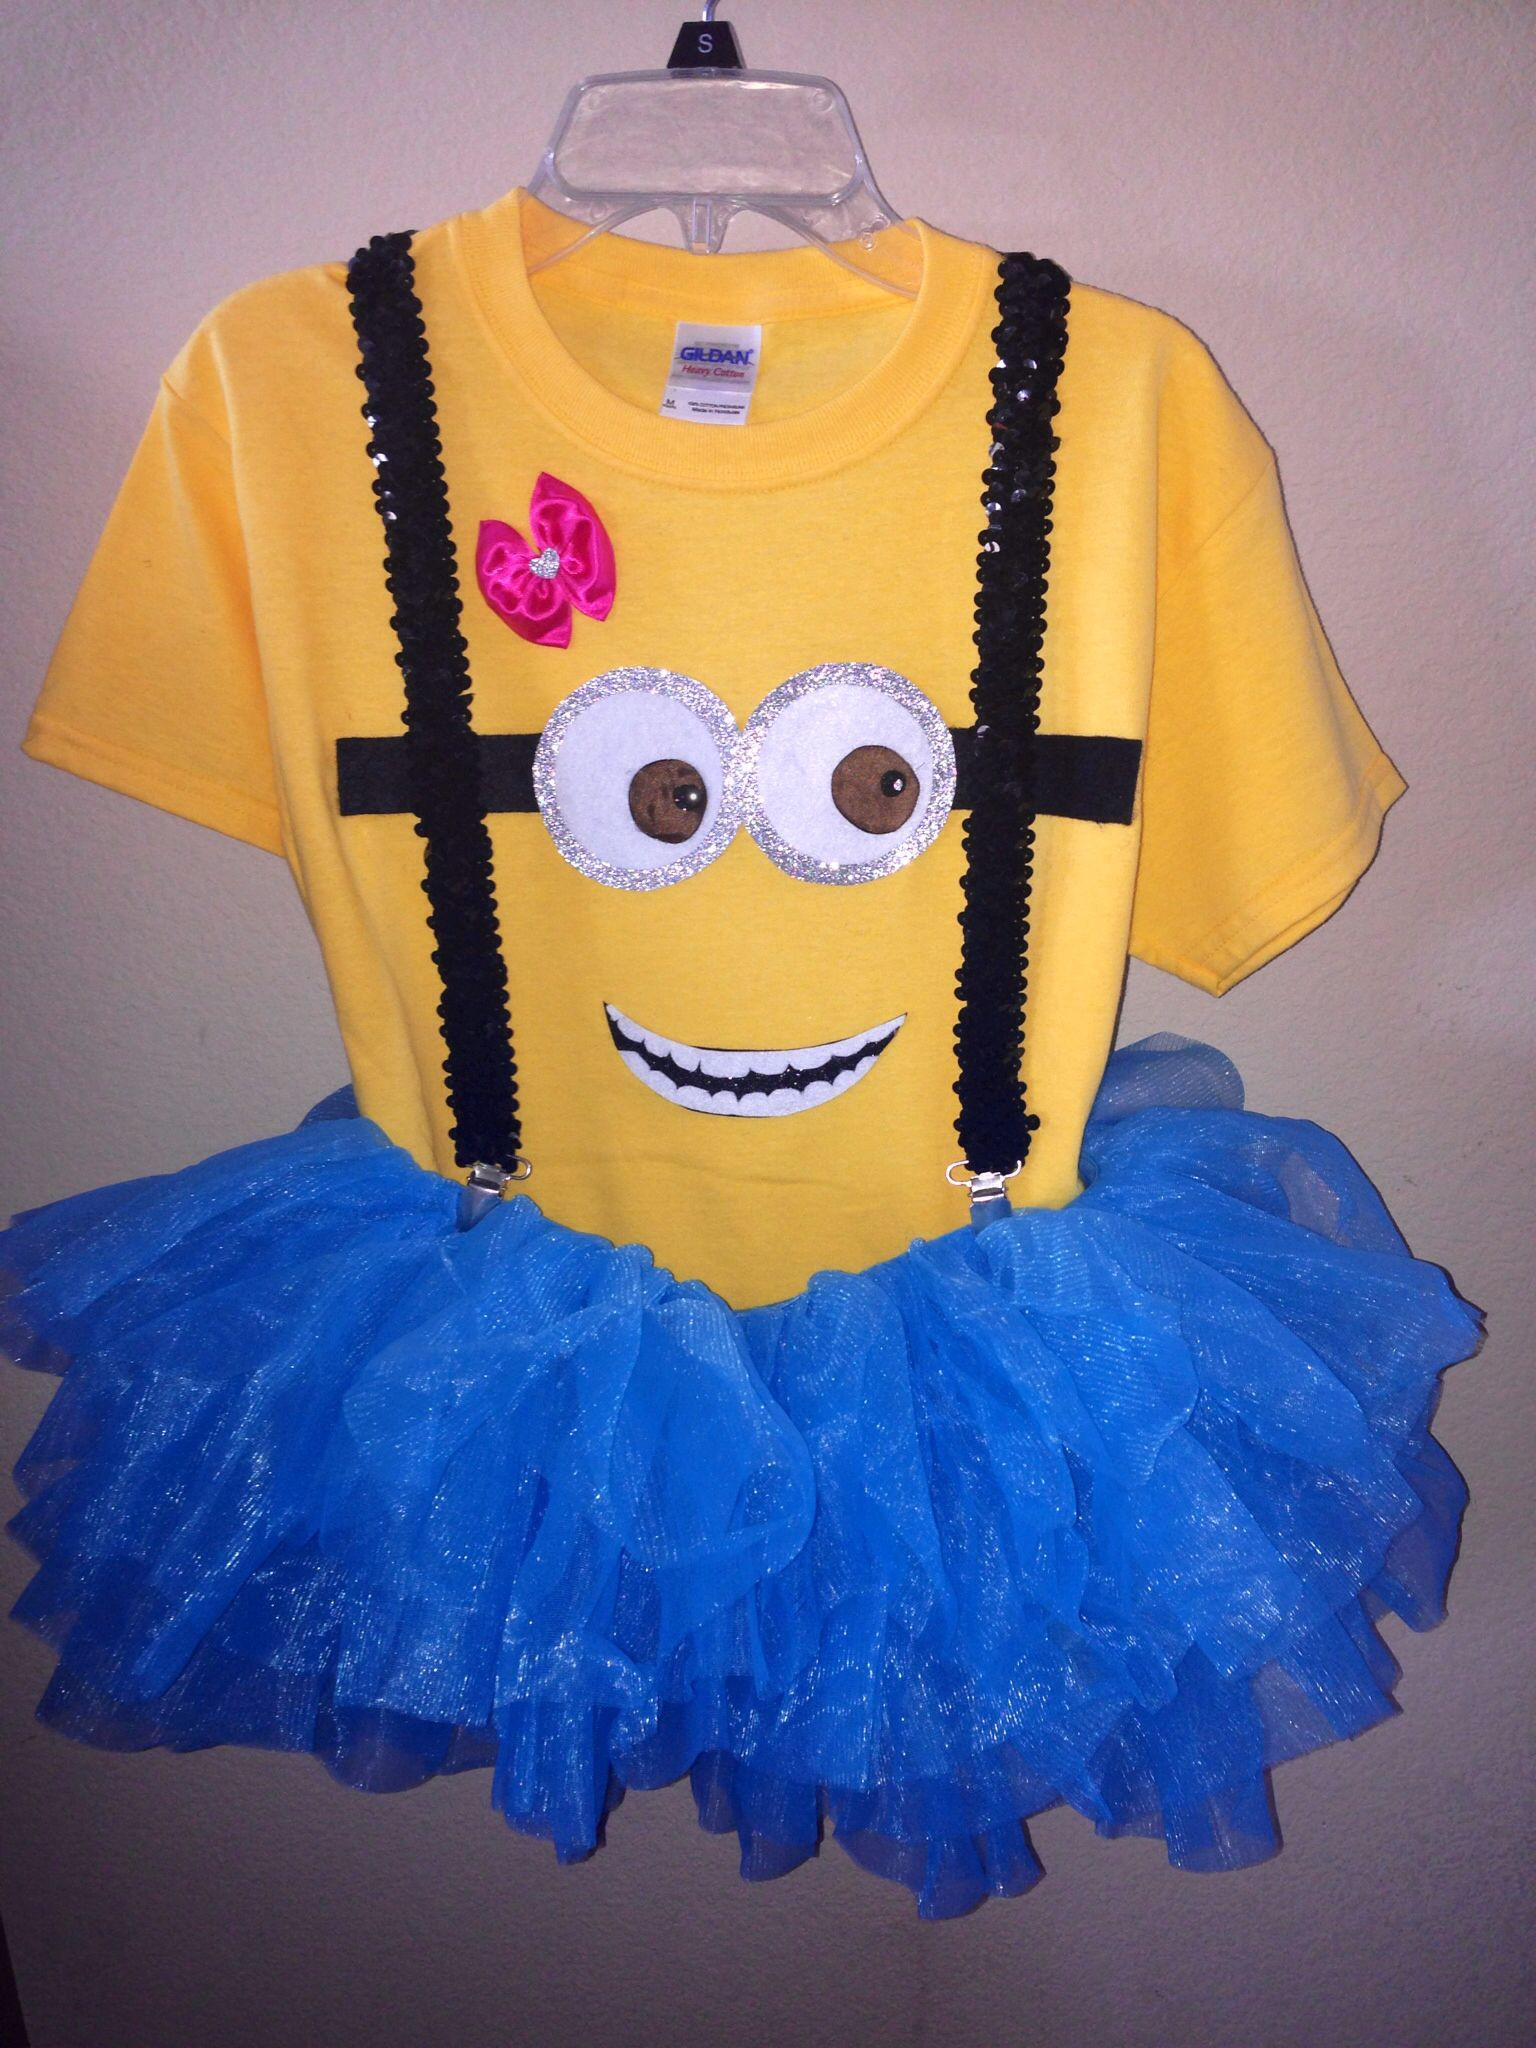 DIY Minion Costume For Toddler
 Homemade minion costume For my Living Dolls